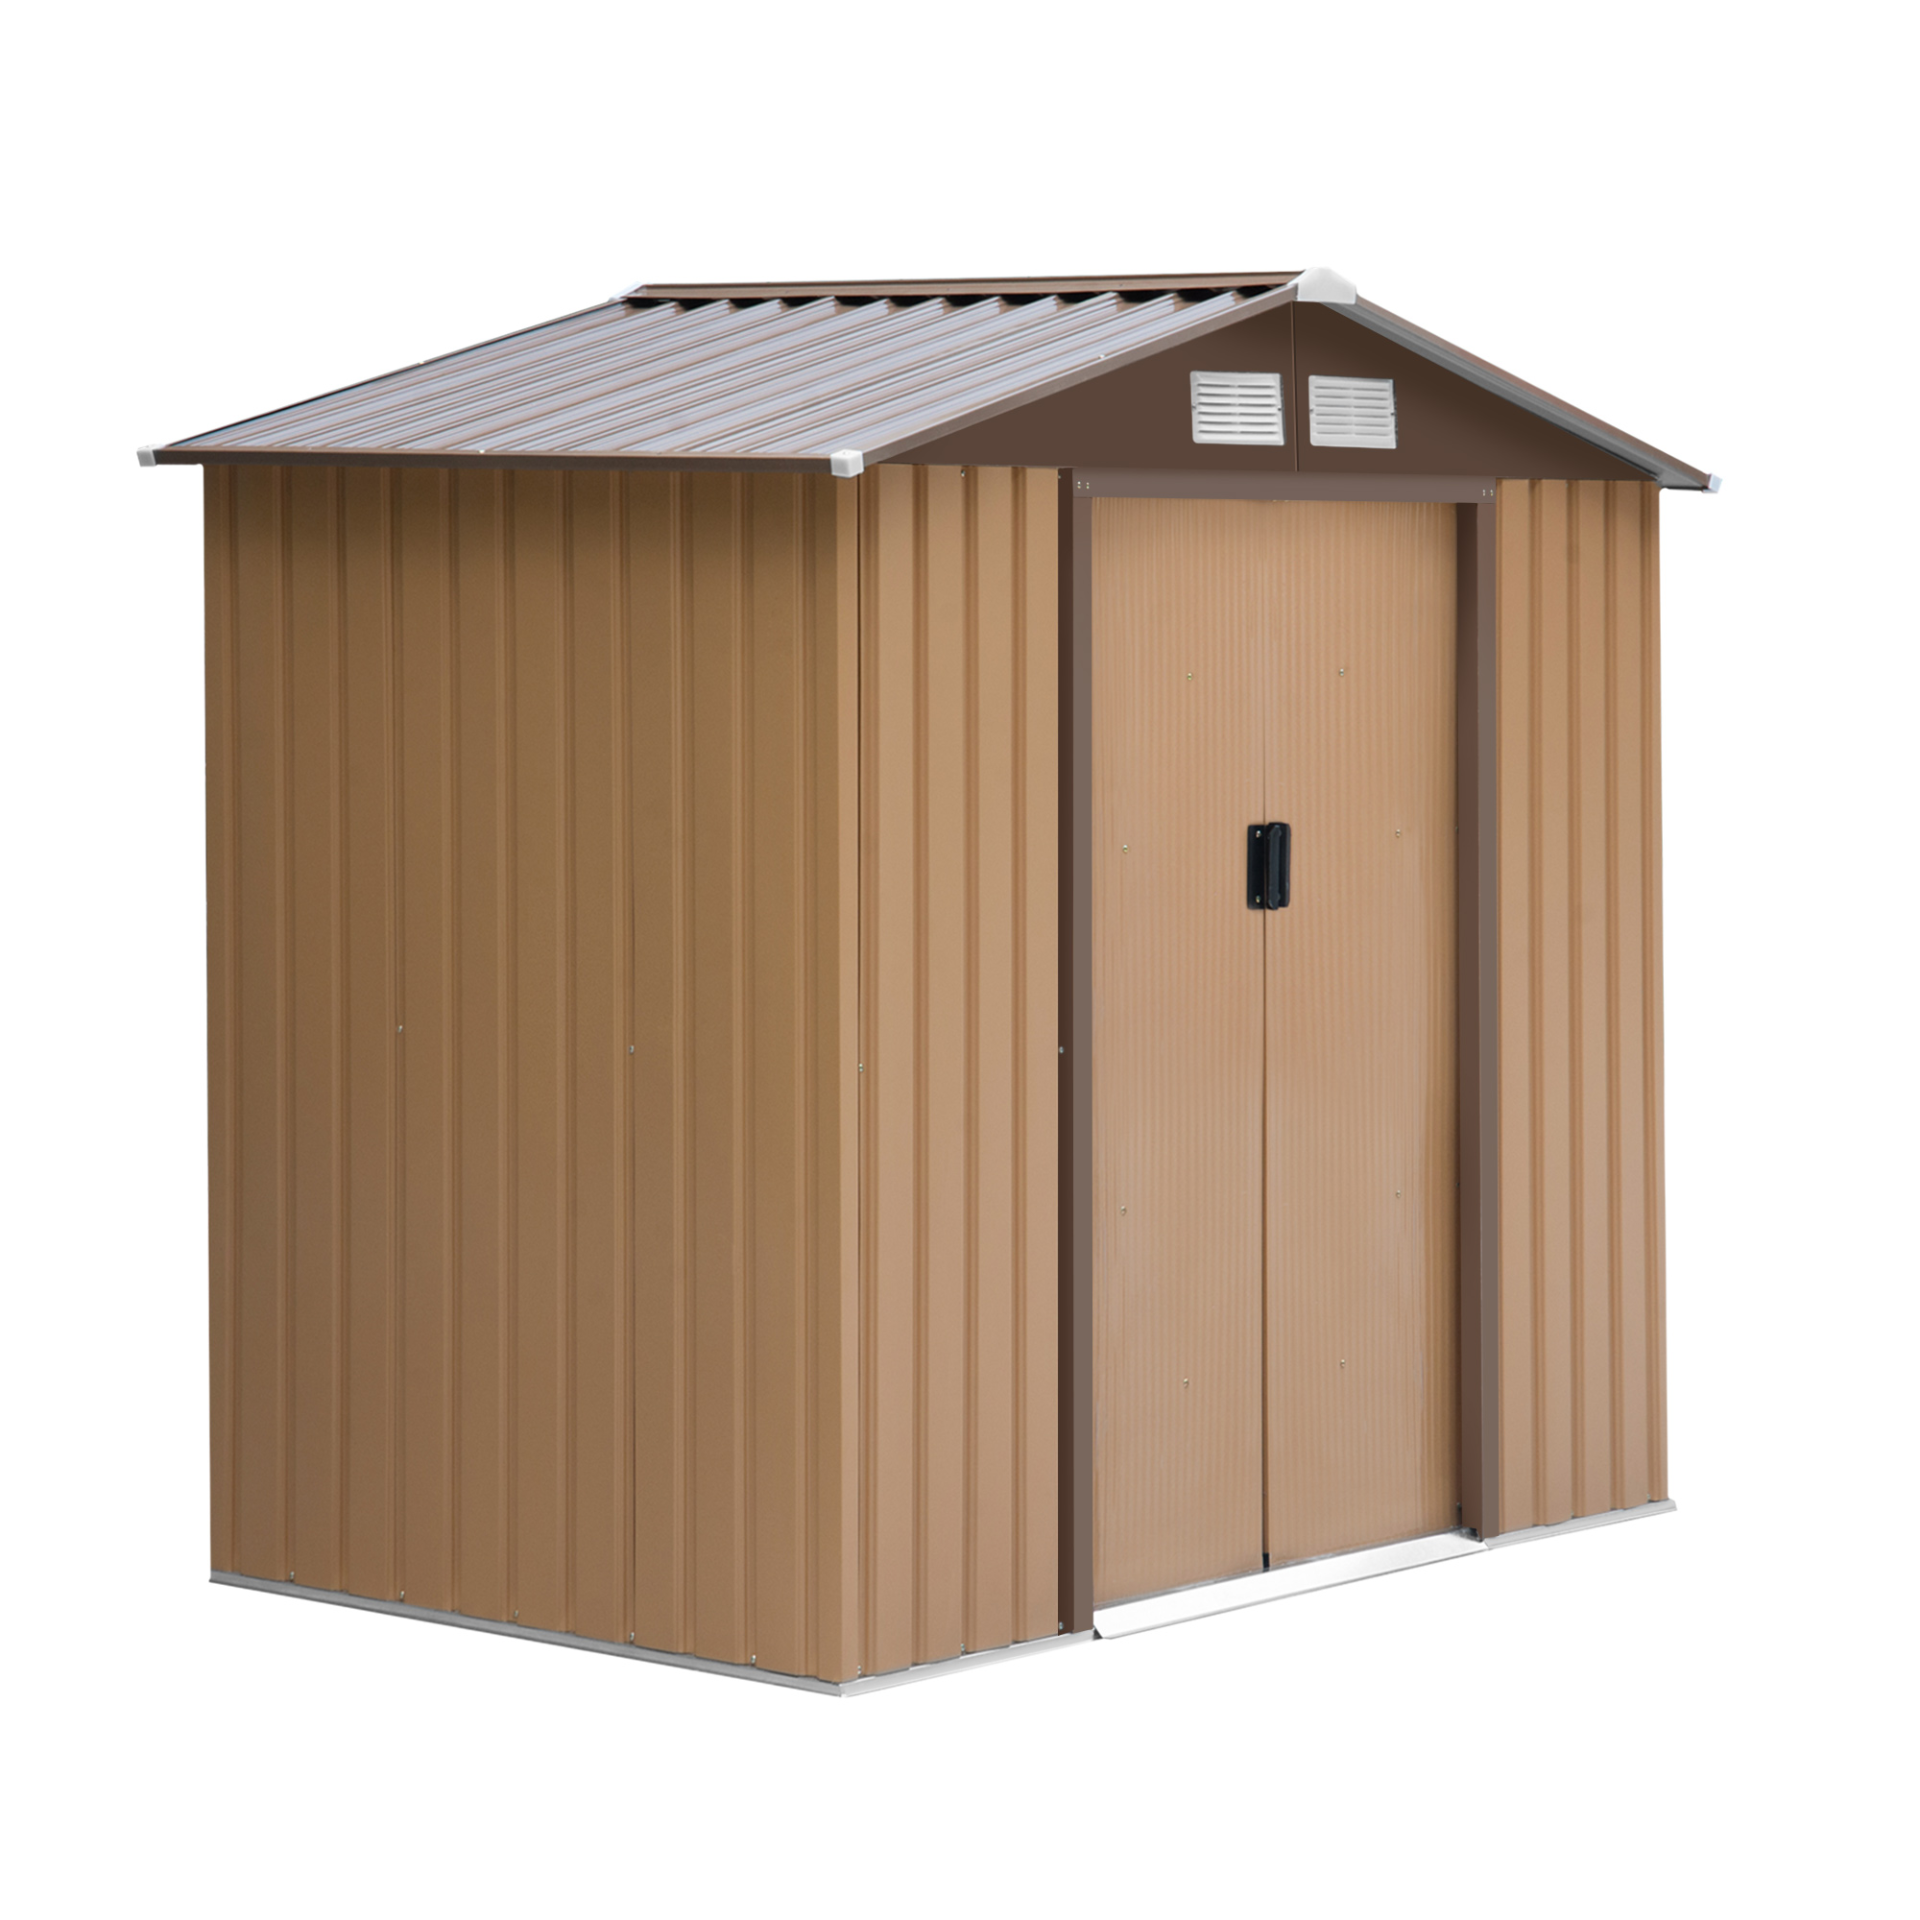 Outsunny 7ft x 4ft Lockable Garden Metal Storage Shed Large Patio Roofed Tool St